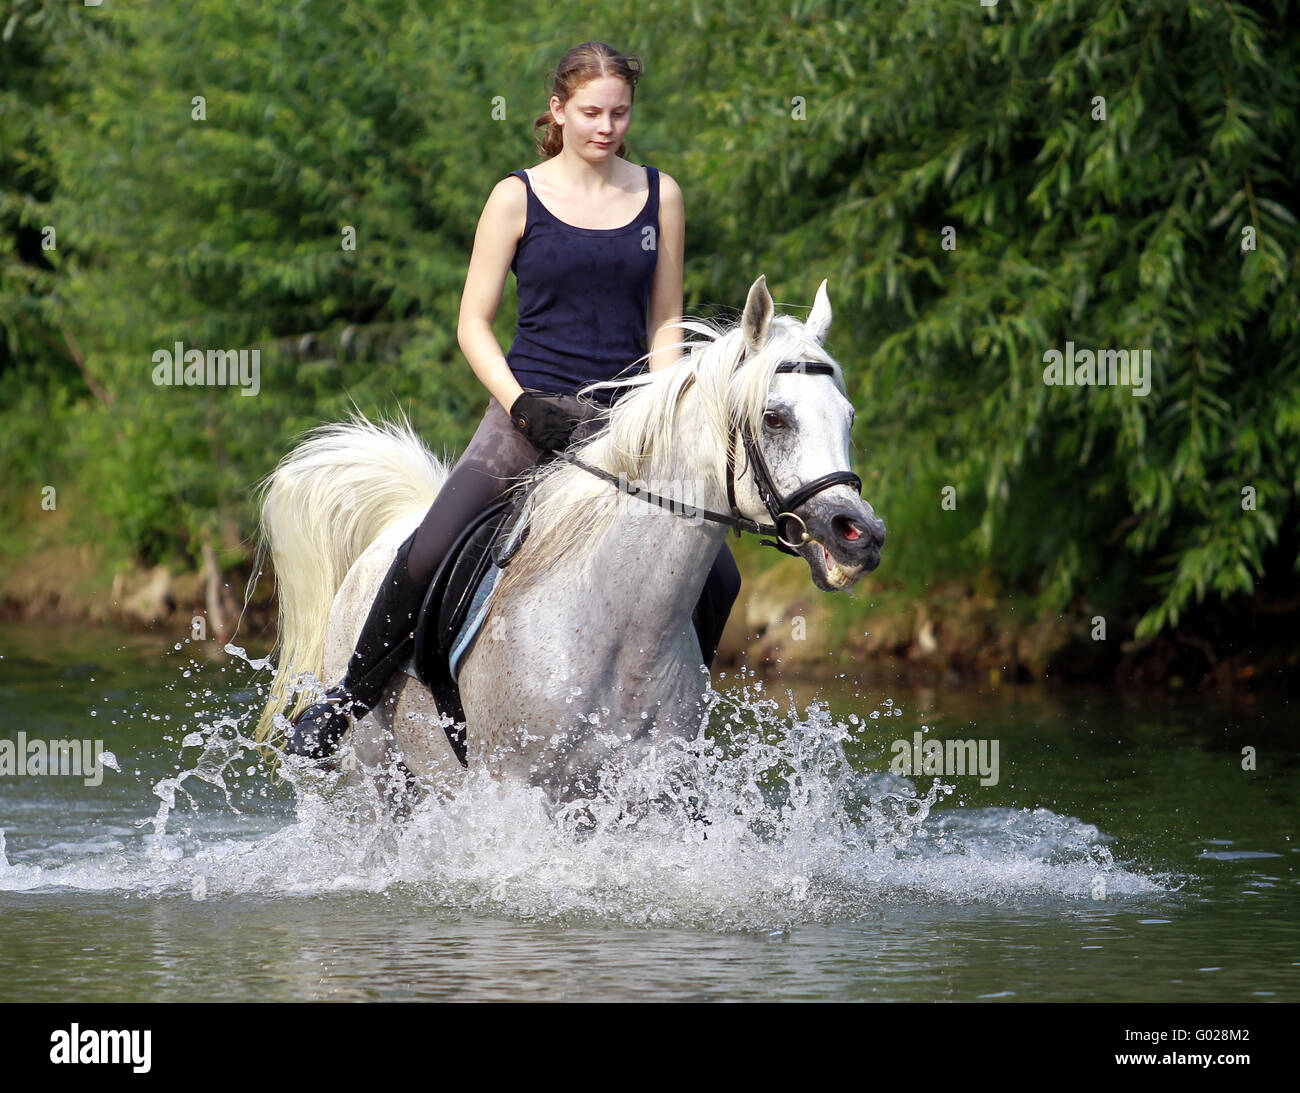 A young woman rides a horse in the water Stock Photo